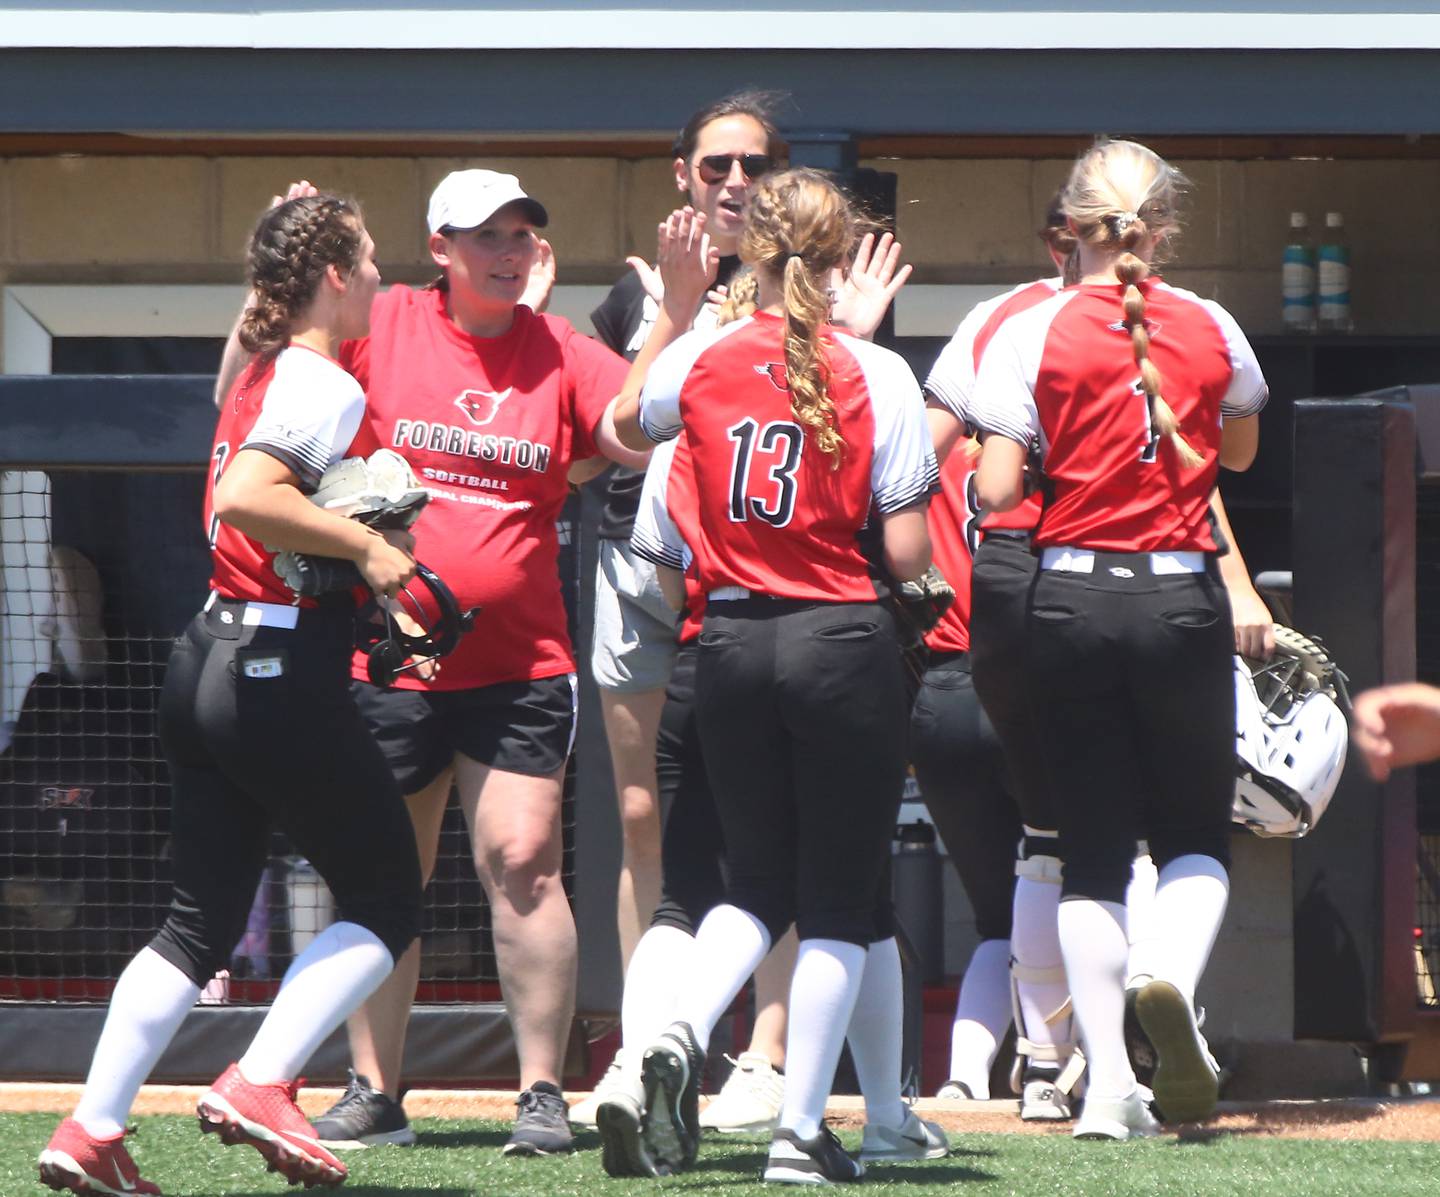 Forreston's head coach Kim Snider hi-fives players as they enter the dugout after running off the field between innings against Casey in the Class 1A State Softball semifinal game on Friday, June 3, 2022 at the Louisville Slugger Sports Complex in Peoria.